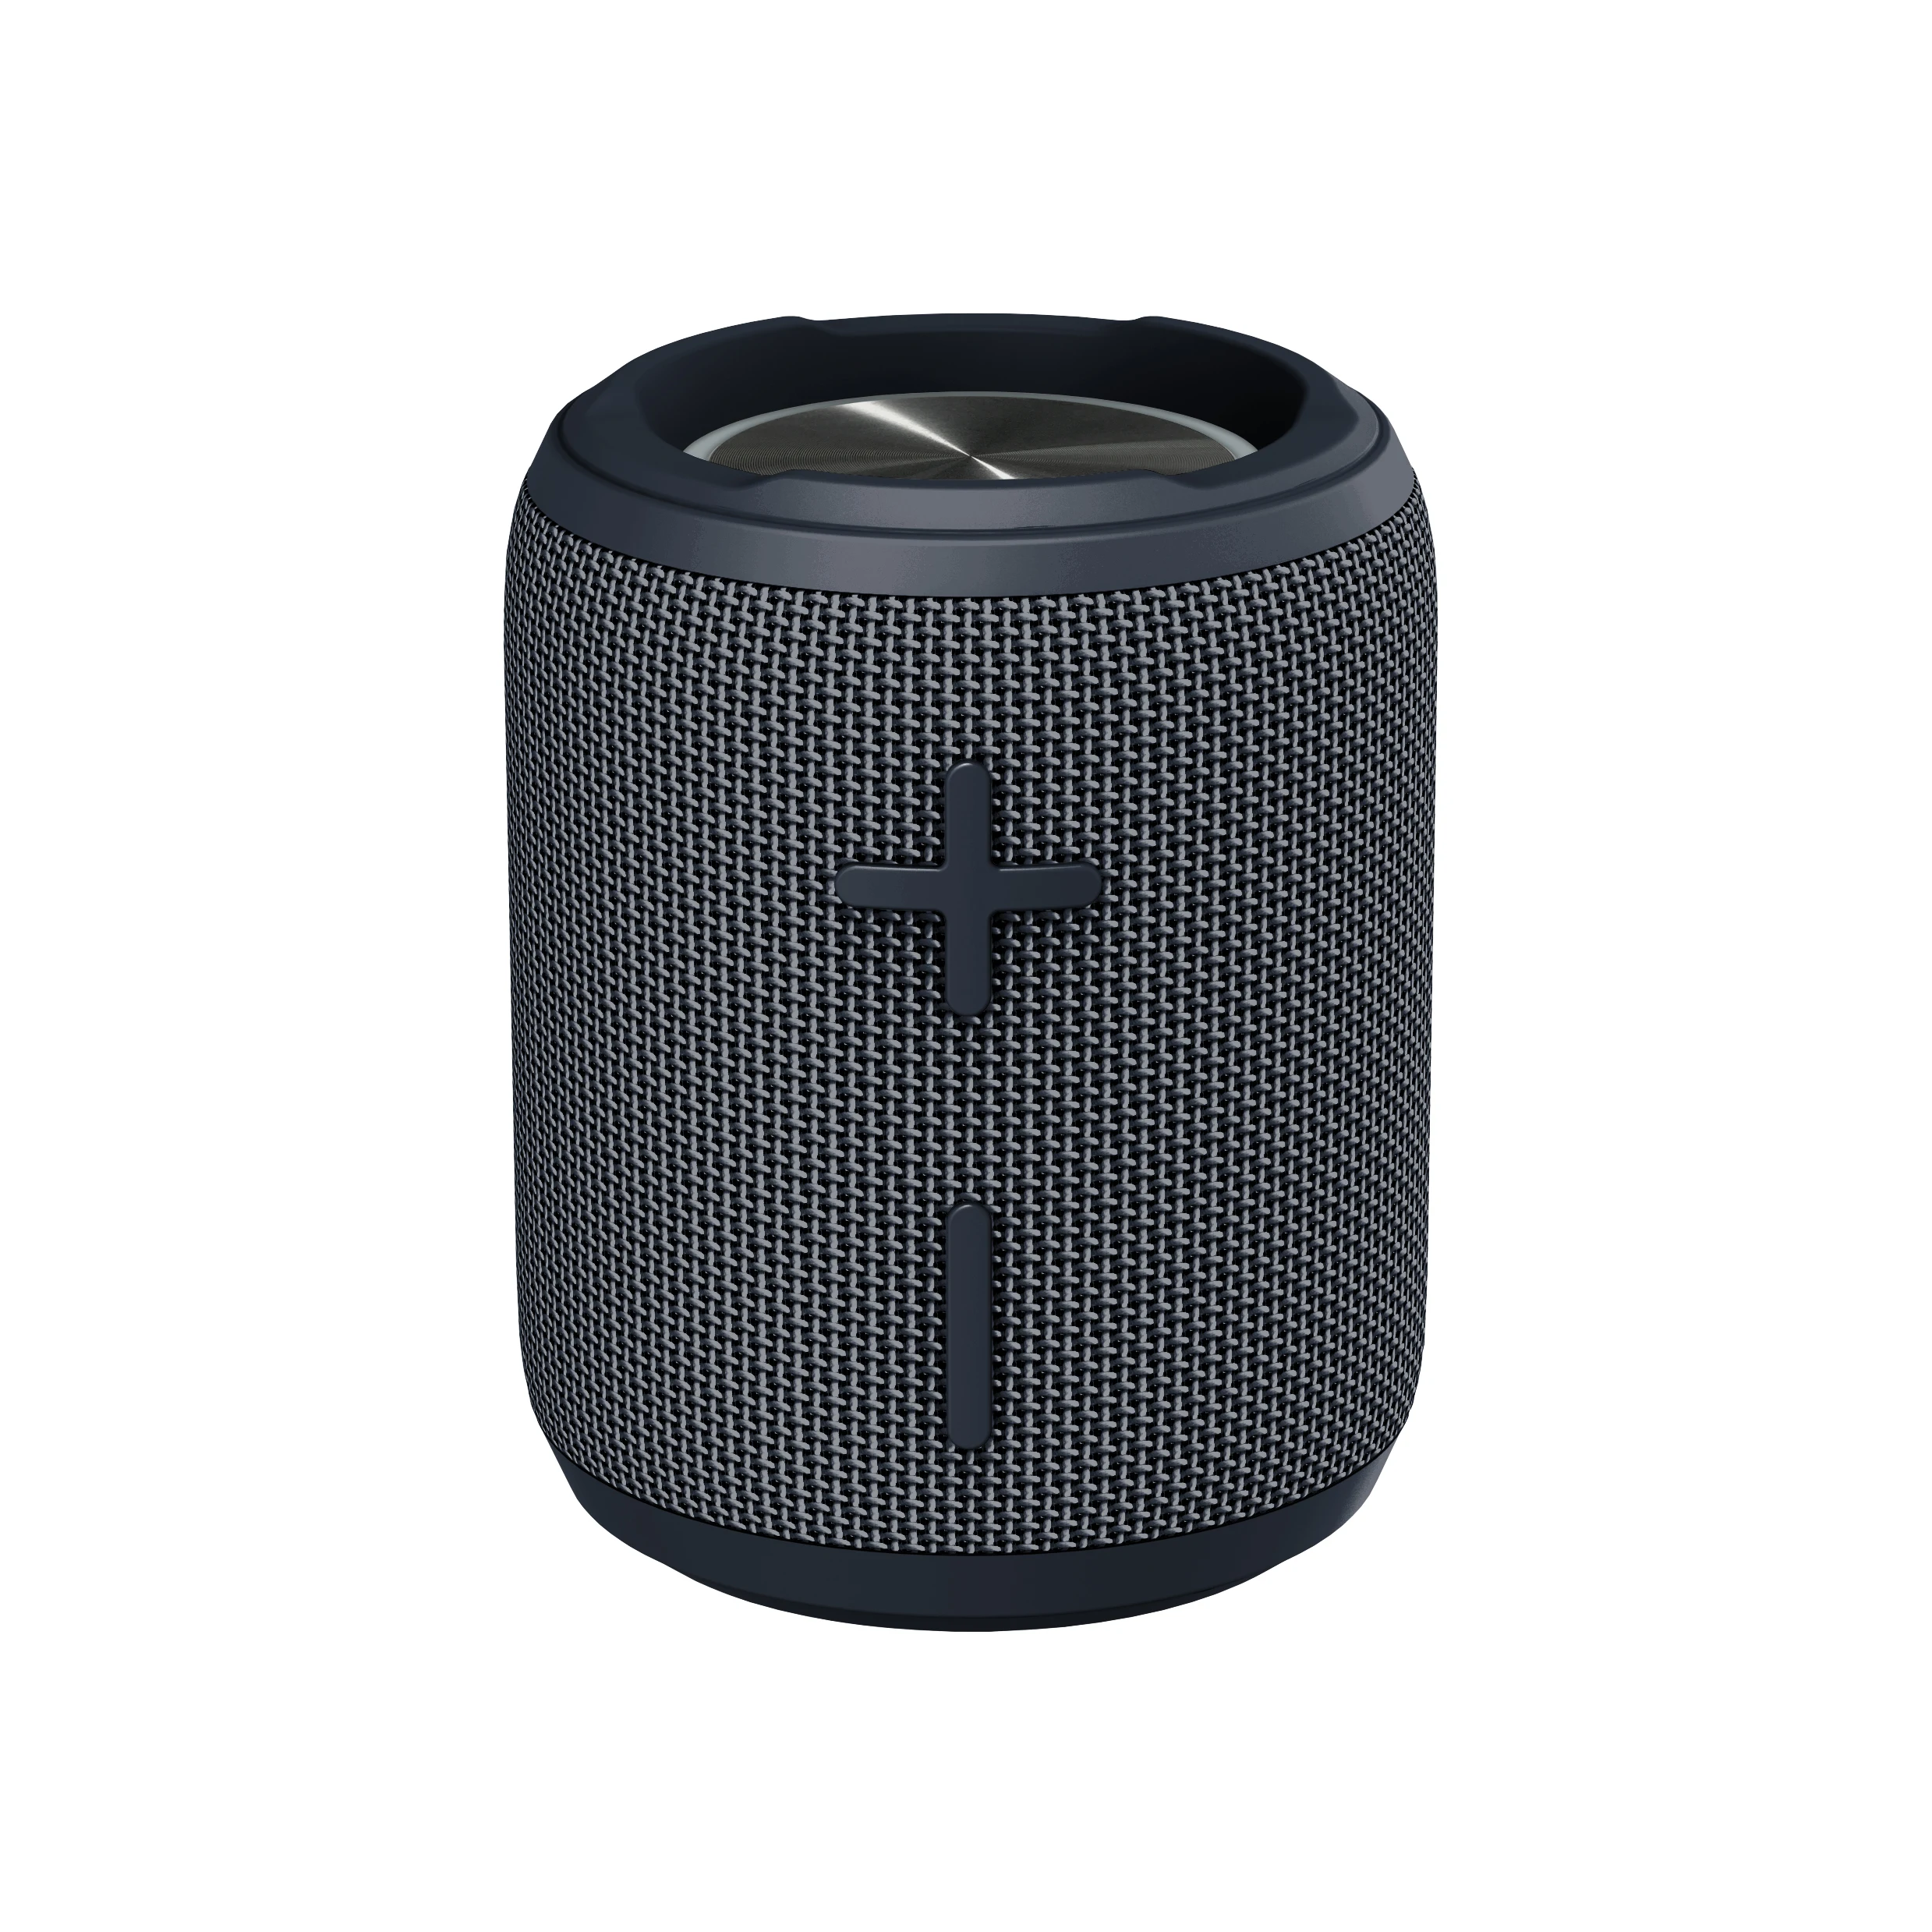 The Best Portable Bluetooth Speakers for Travel, Tested - Carryology